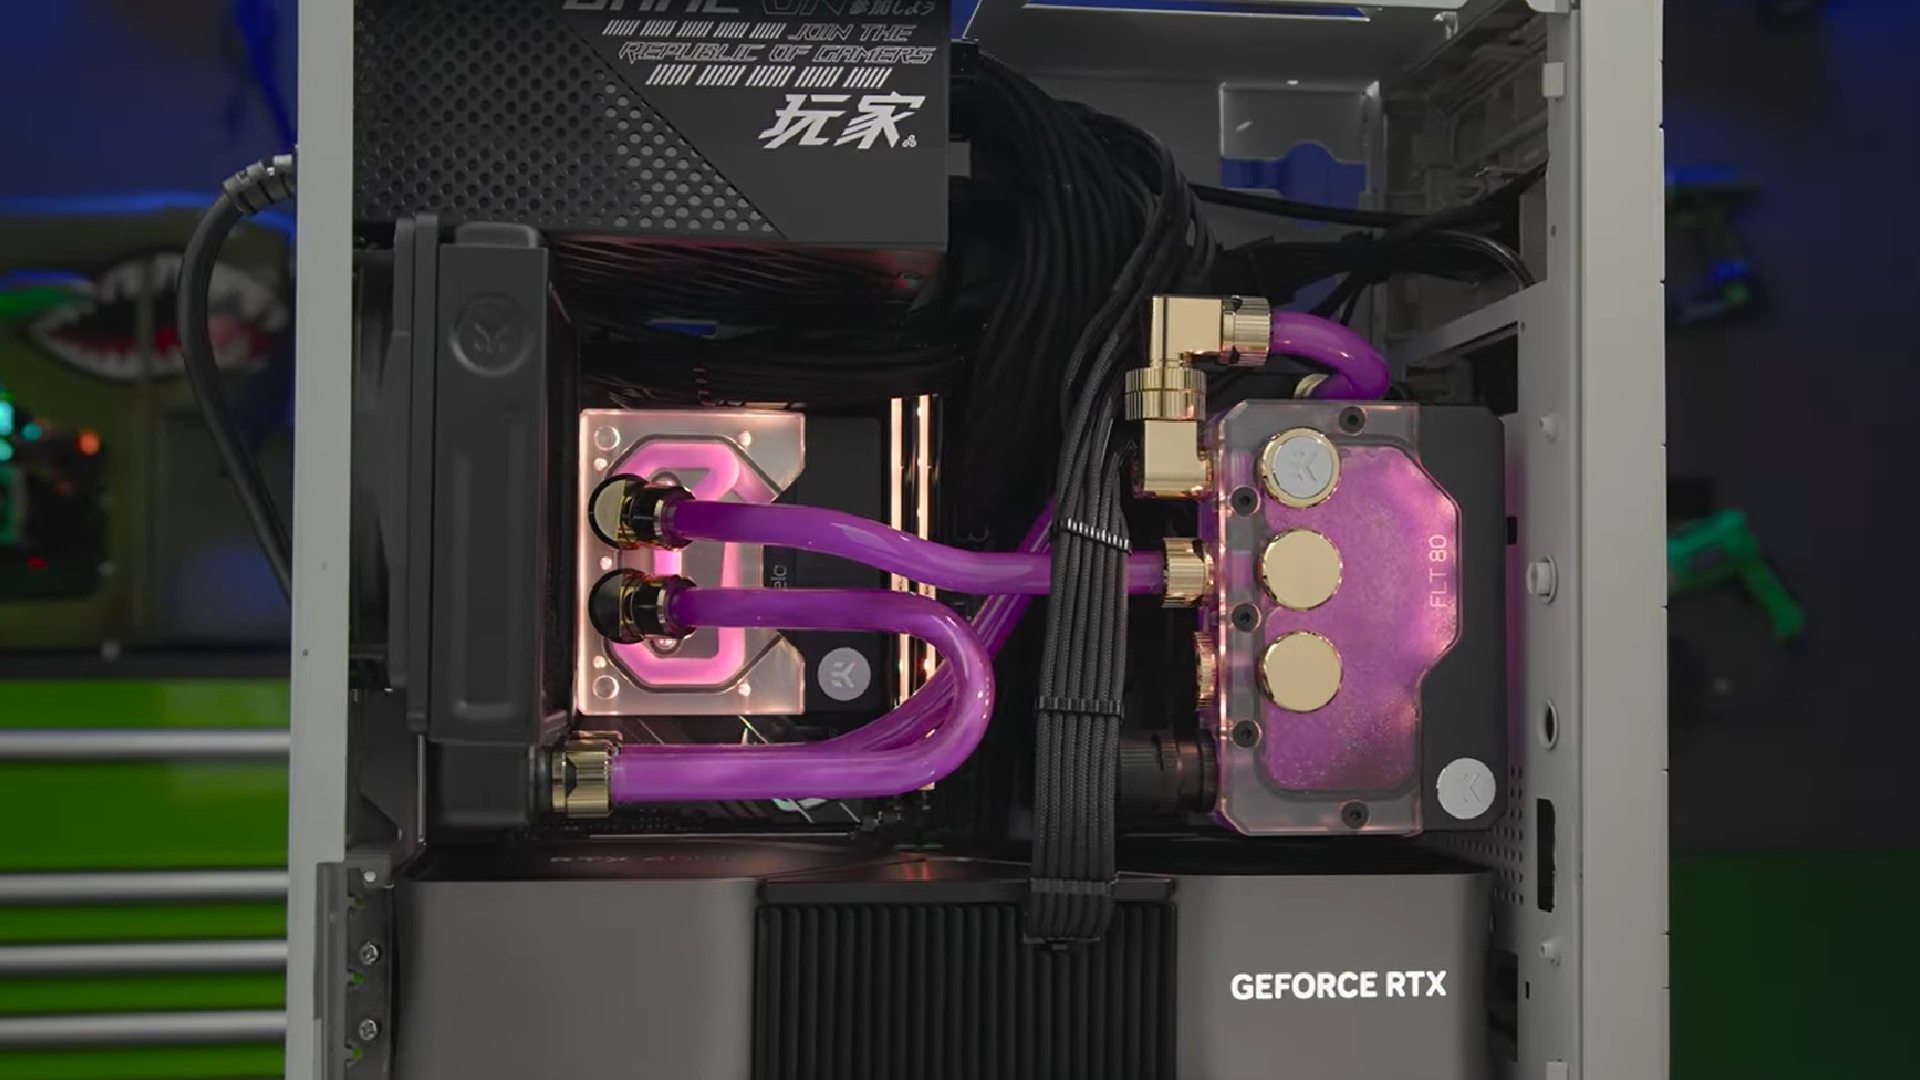 This Nvidia RTX 4090 sleeper gaming PC belongs in a '90s bedroom